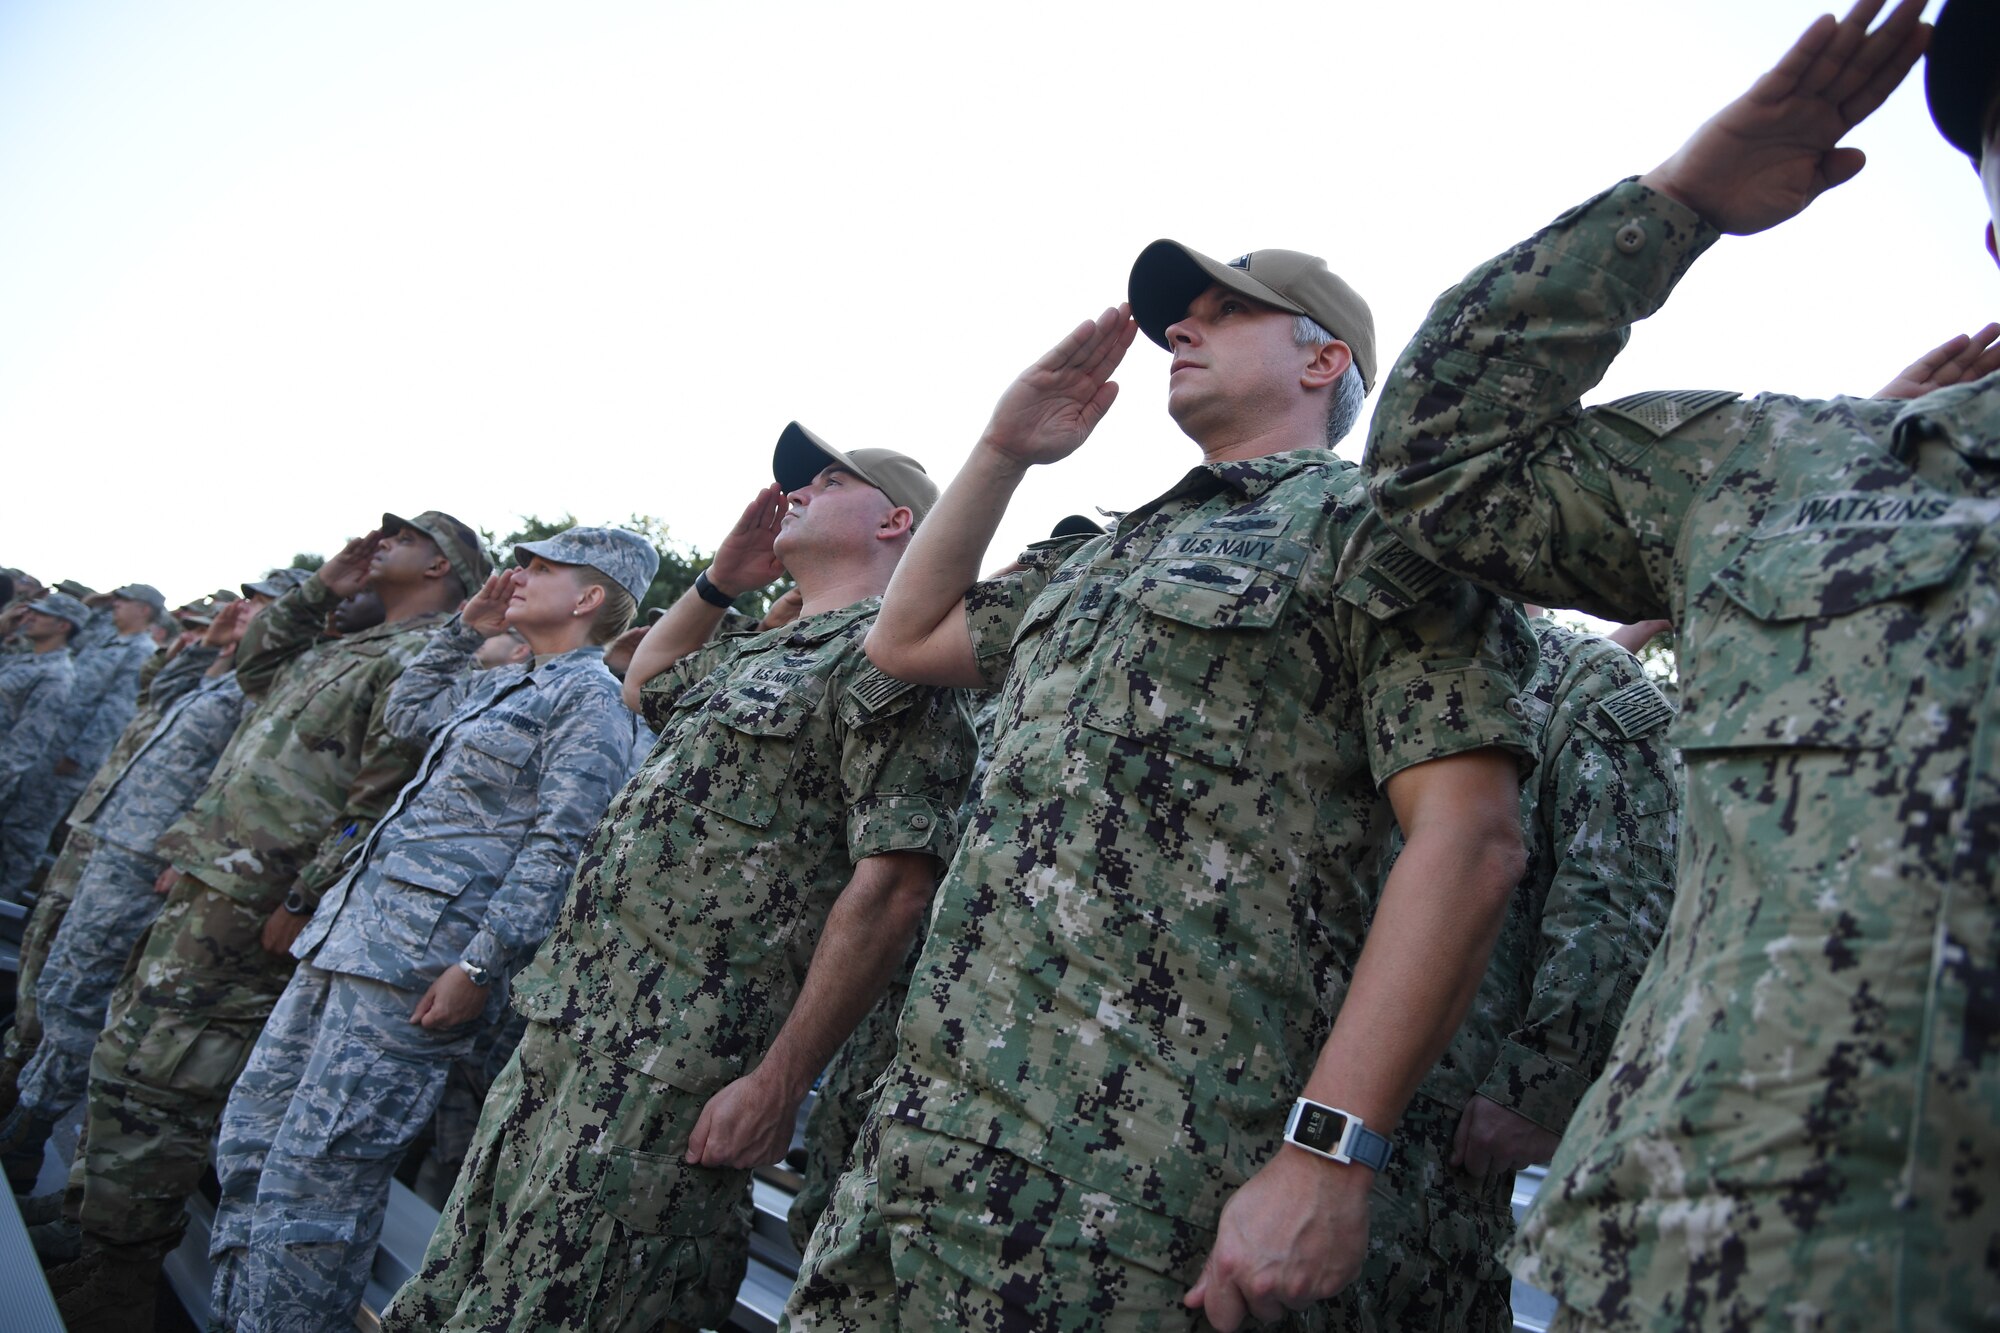 Keesler Airmen, Sailors and Marines render a salute during a 9/11 memorial ceremony hosted by the Center for Naval Aviation Technical Training Unit Keesler in front of the 81st Training Wing headquarters building on Keesler Air Force Base, Mississippi, Sept. 11, 2019. The event honored those who lost their lives during the 9/11 attacks. (U.S. Air Force photo by Kemberly Groue)